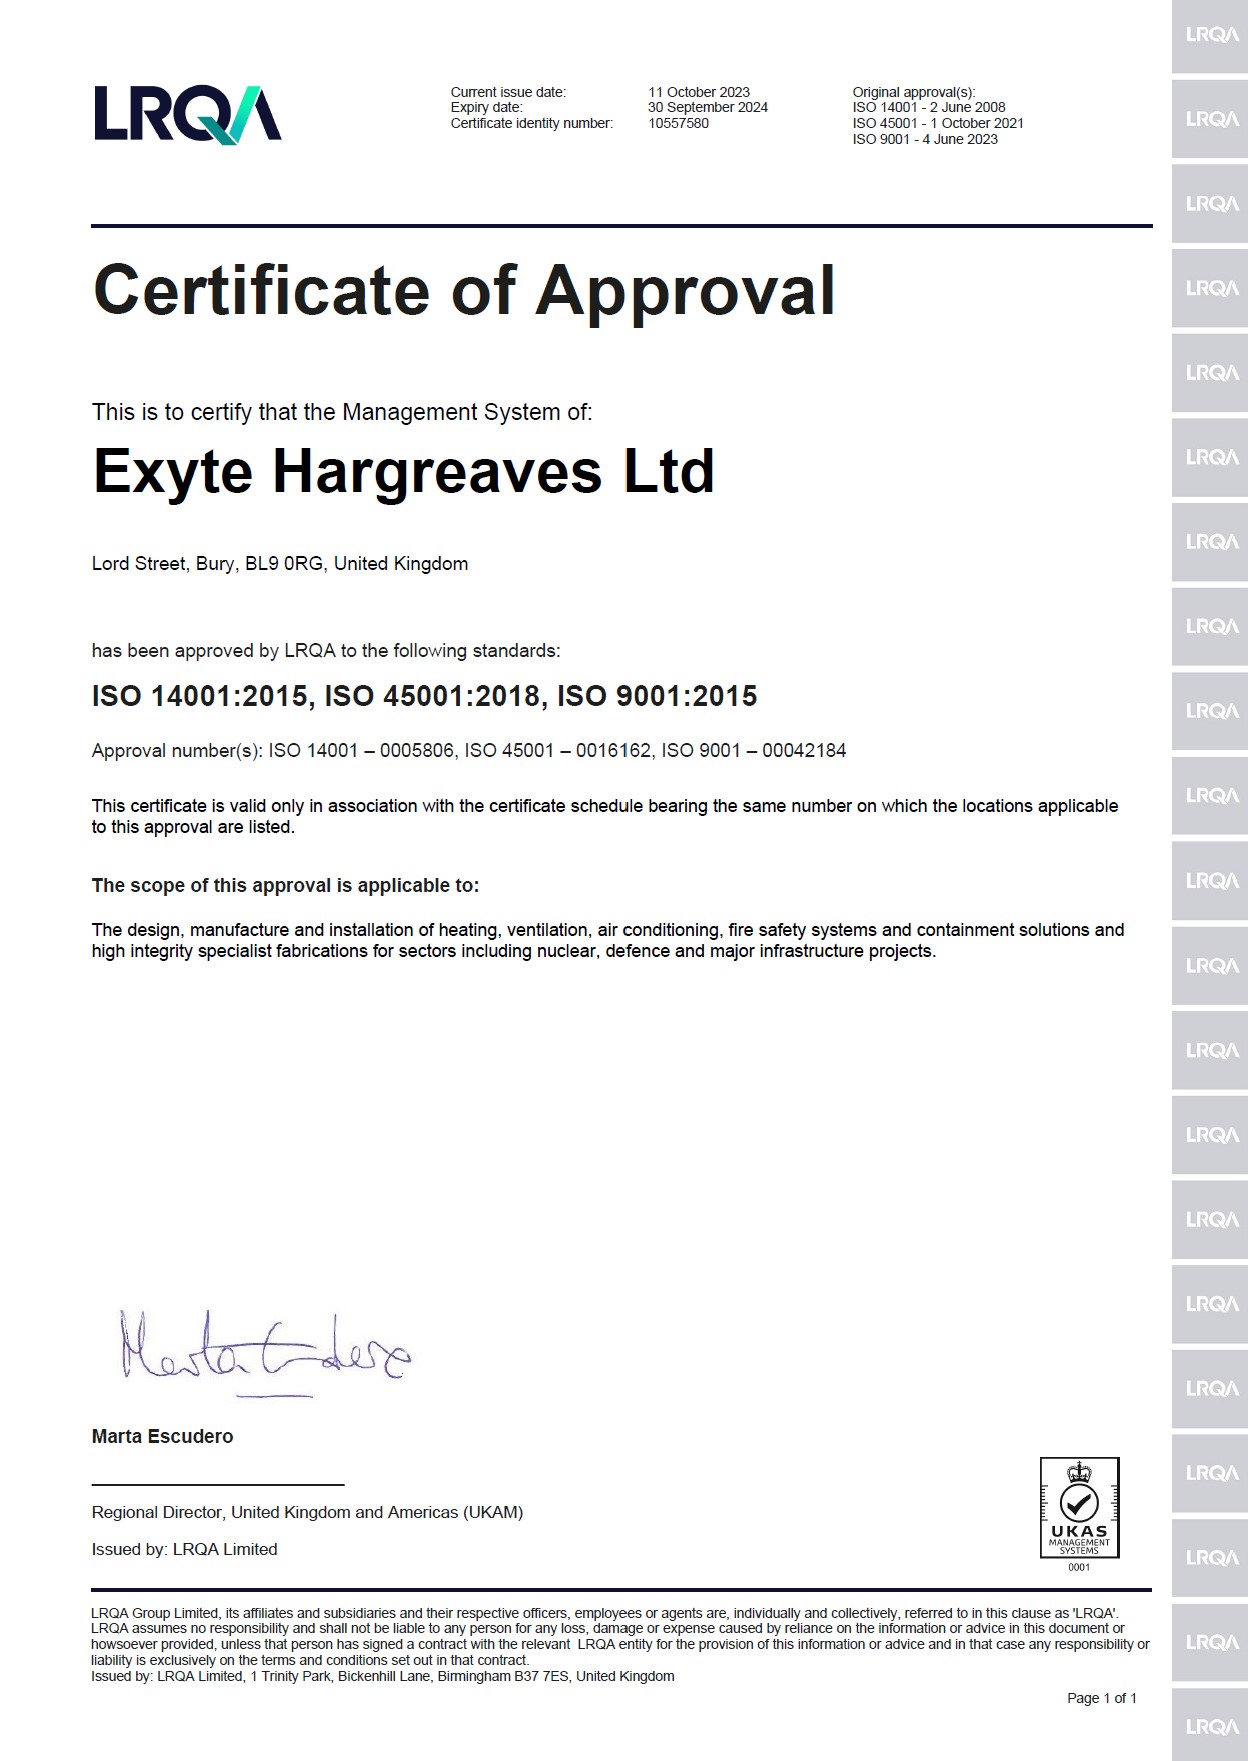 Exyte Hargreaves management system approval certificate